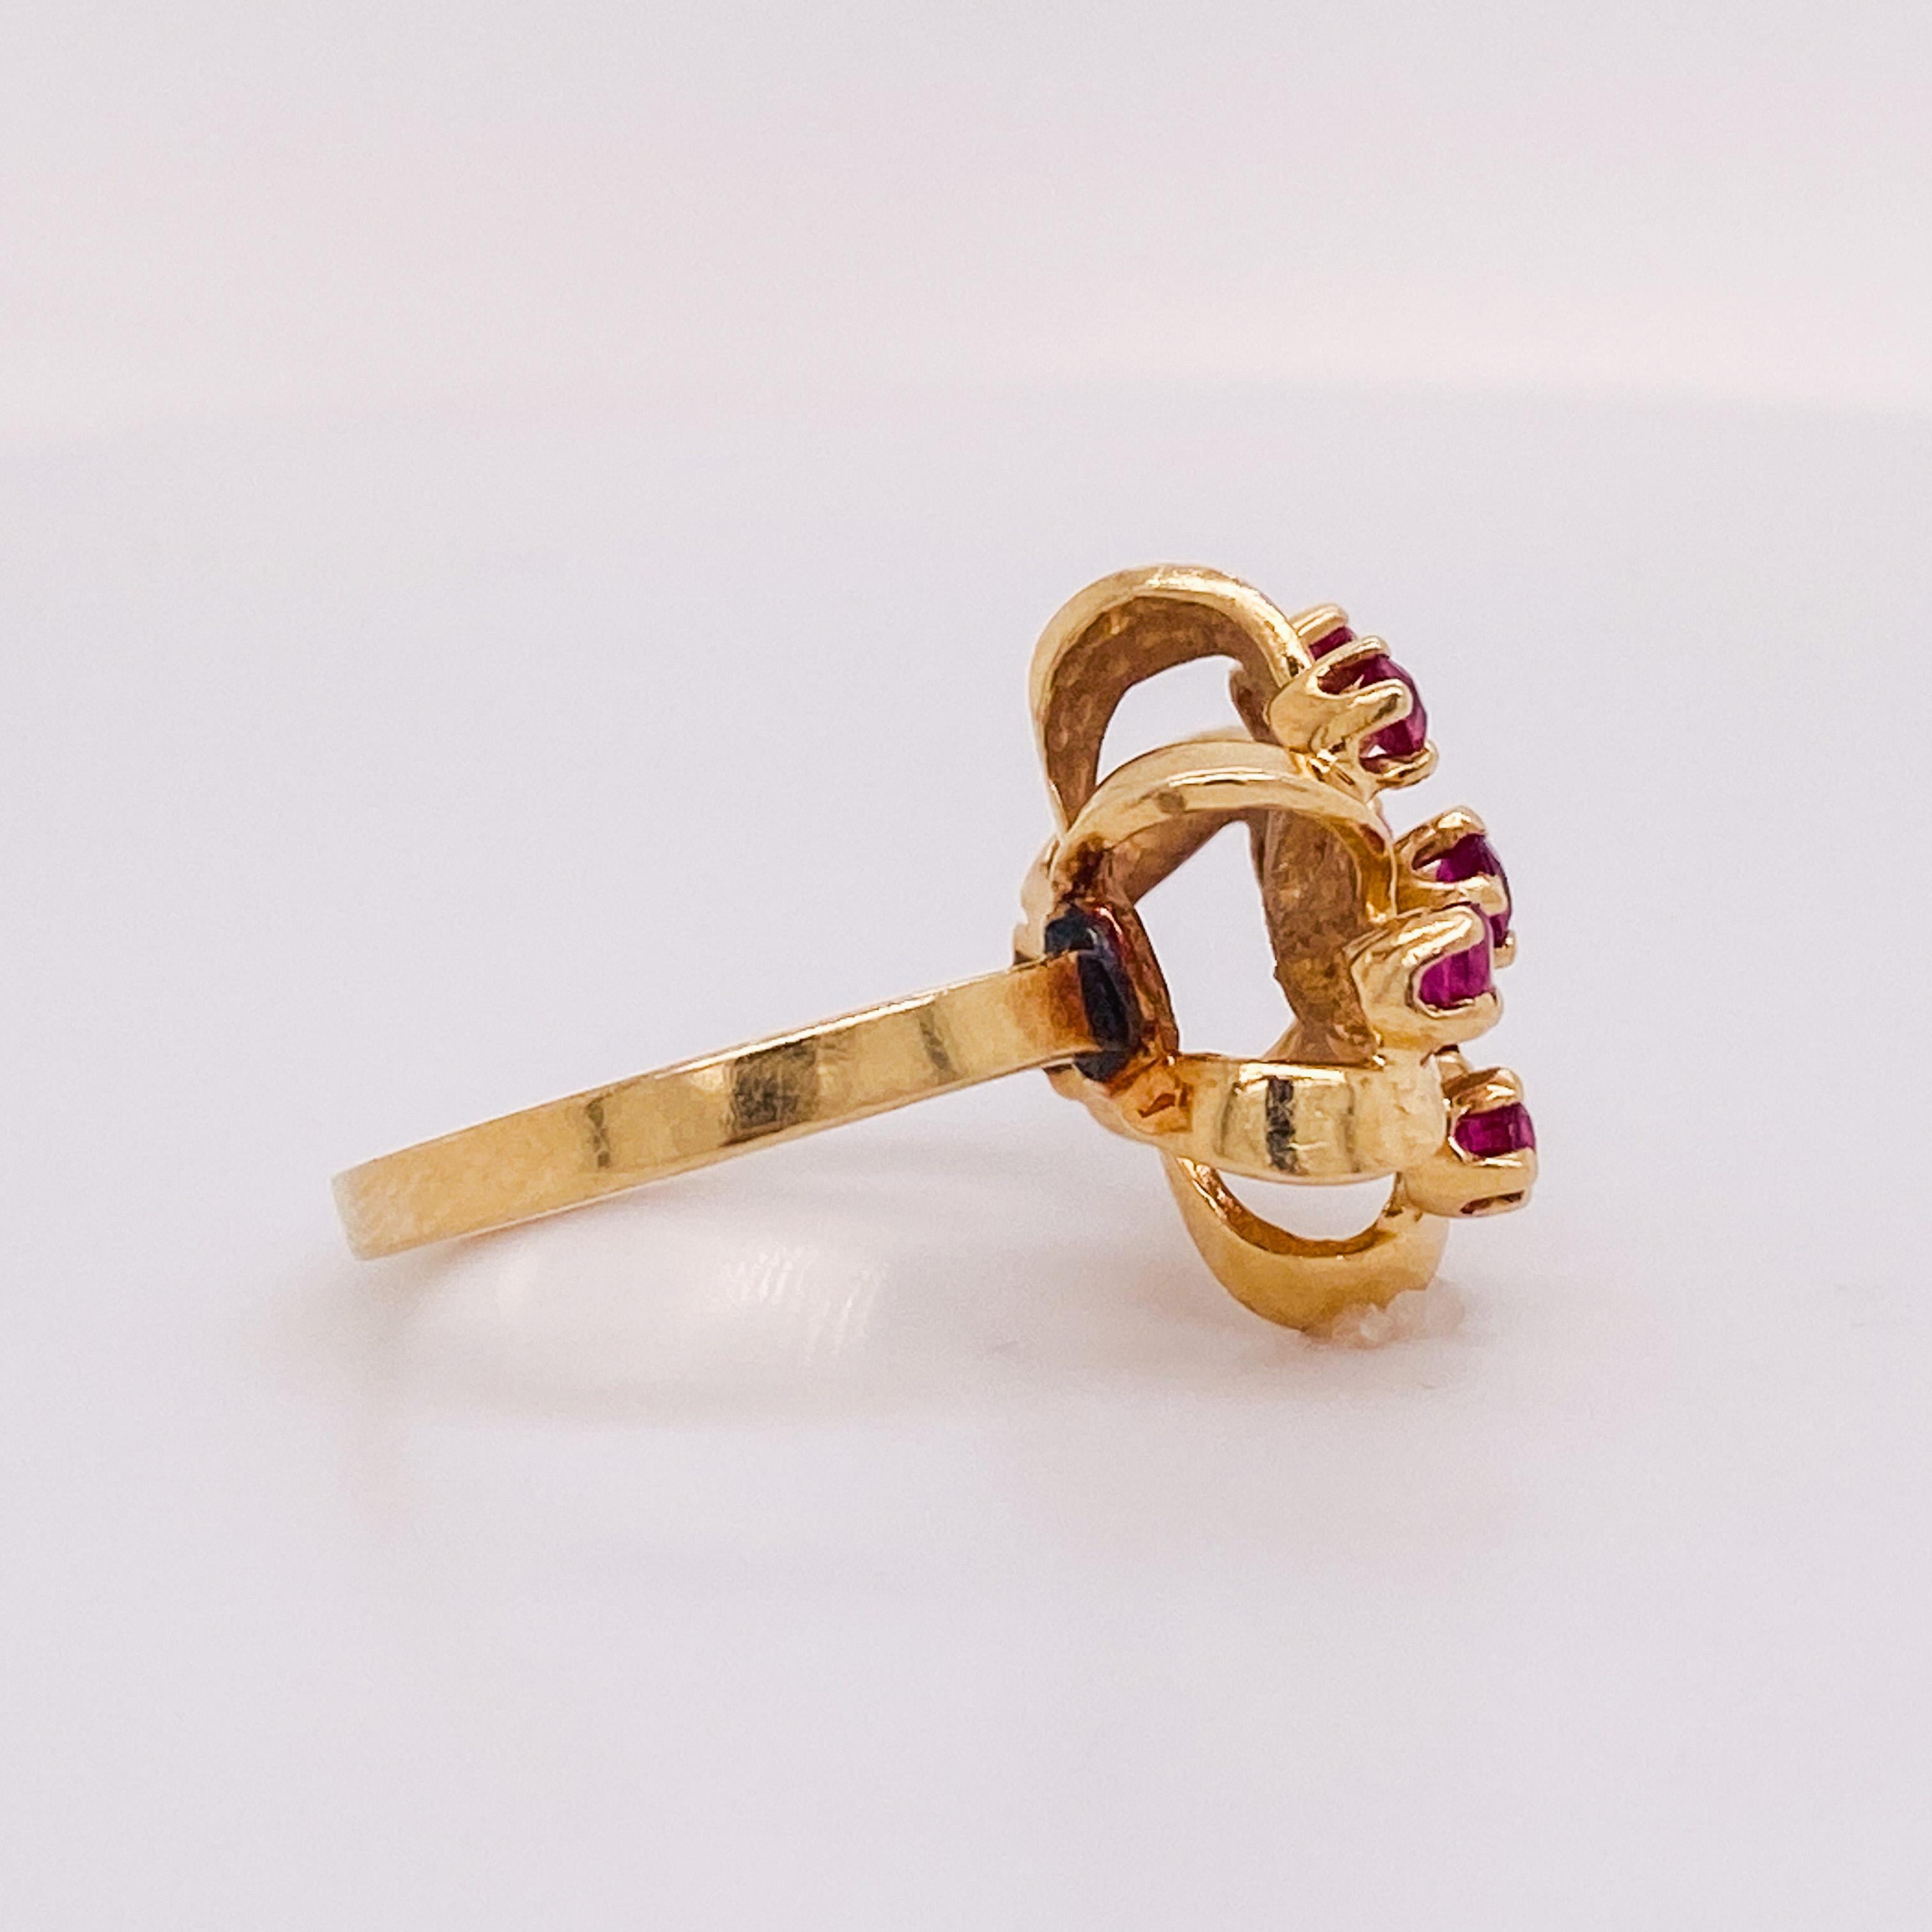 Modern Ruby Ribbon Star Bow Ring 14k Yellow Gold, Bejeweled Crown, 0.41 Cts Rubies (LV) For Sale